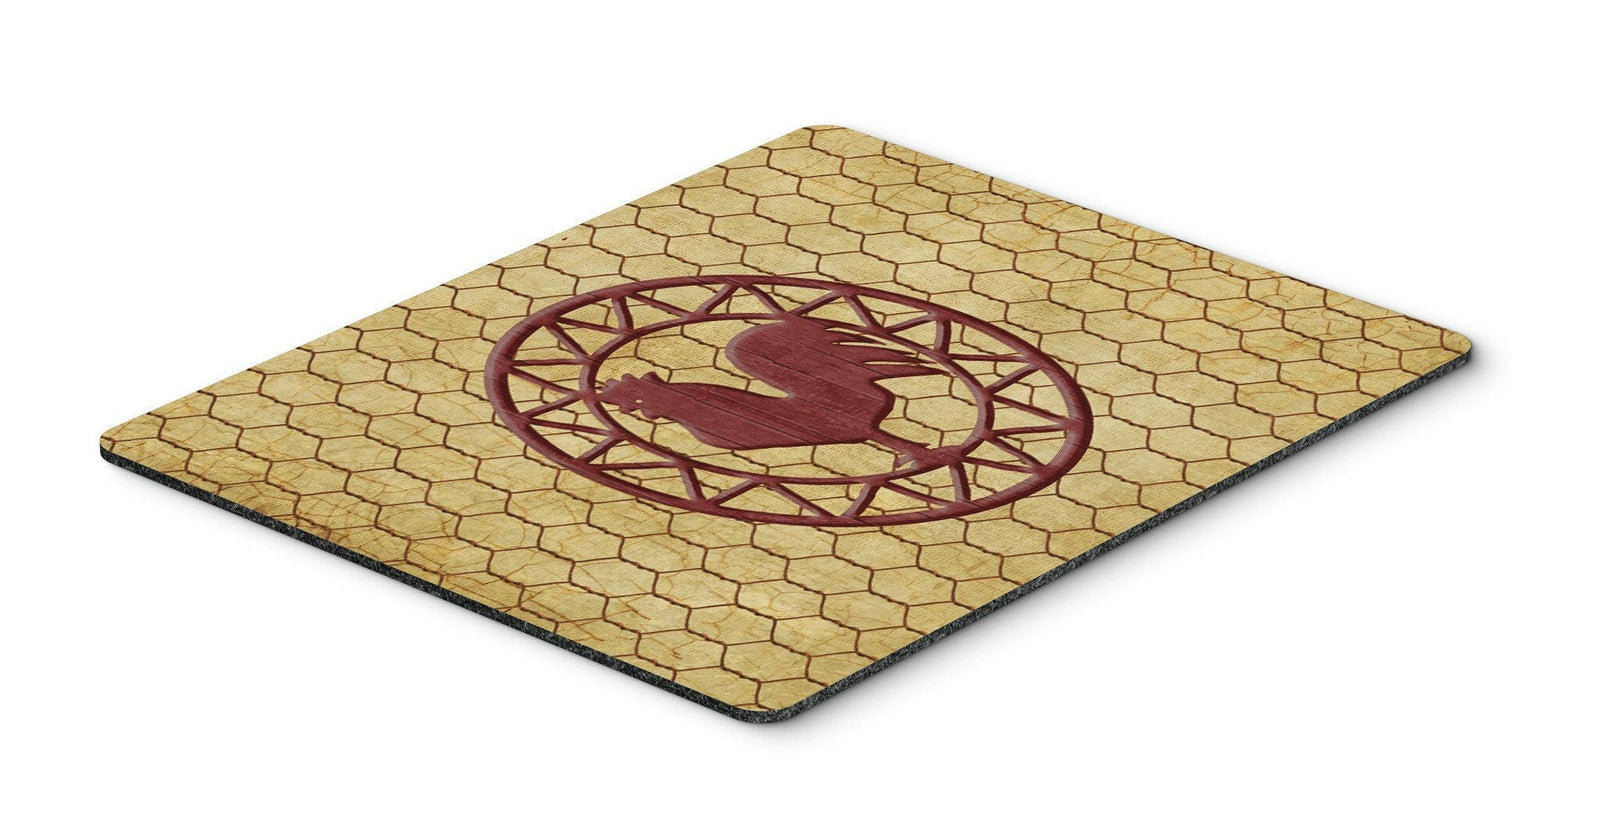 Rooster Chicken Coop Mouse Pad, Hot Pad or Trivet SB3085MP by Caroline's Treasures